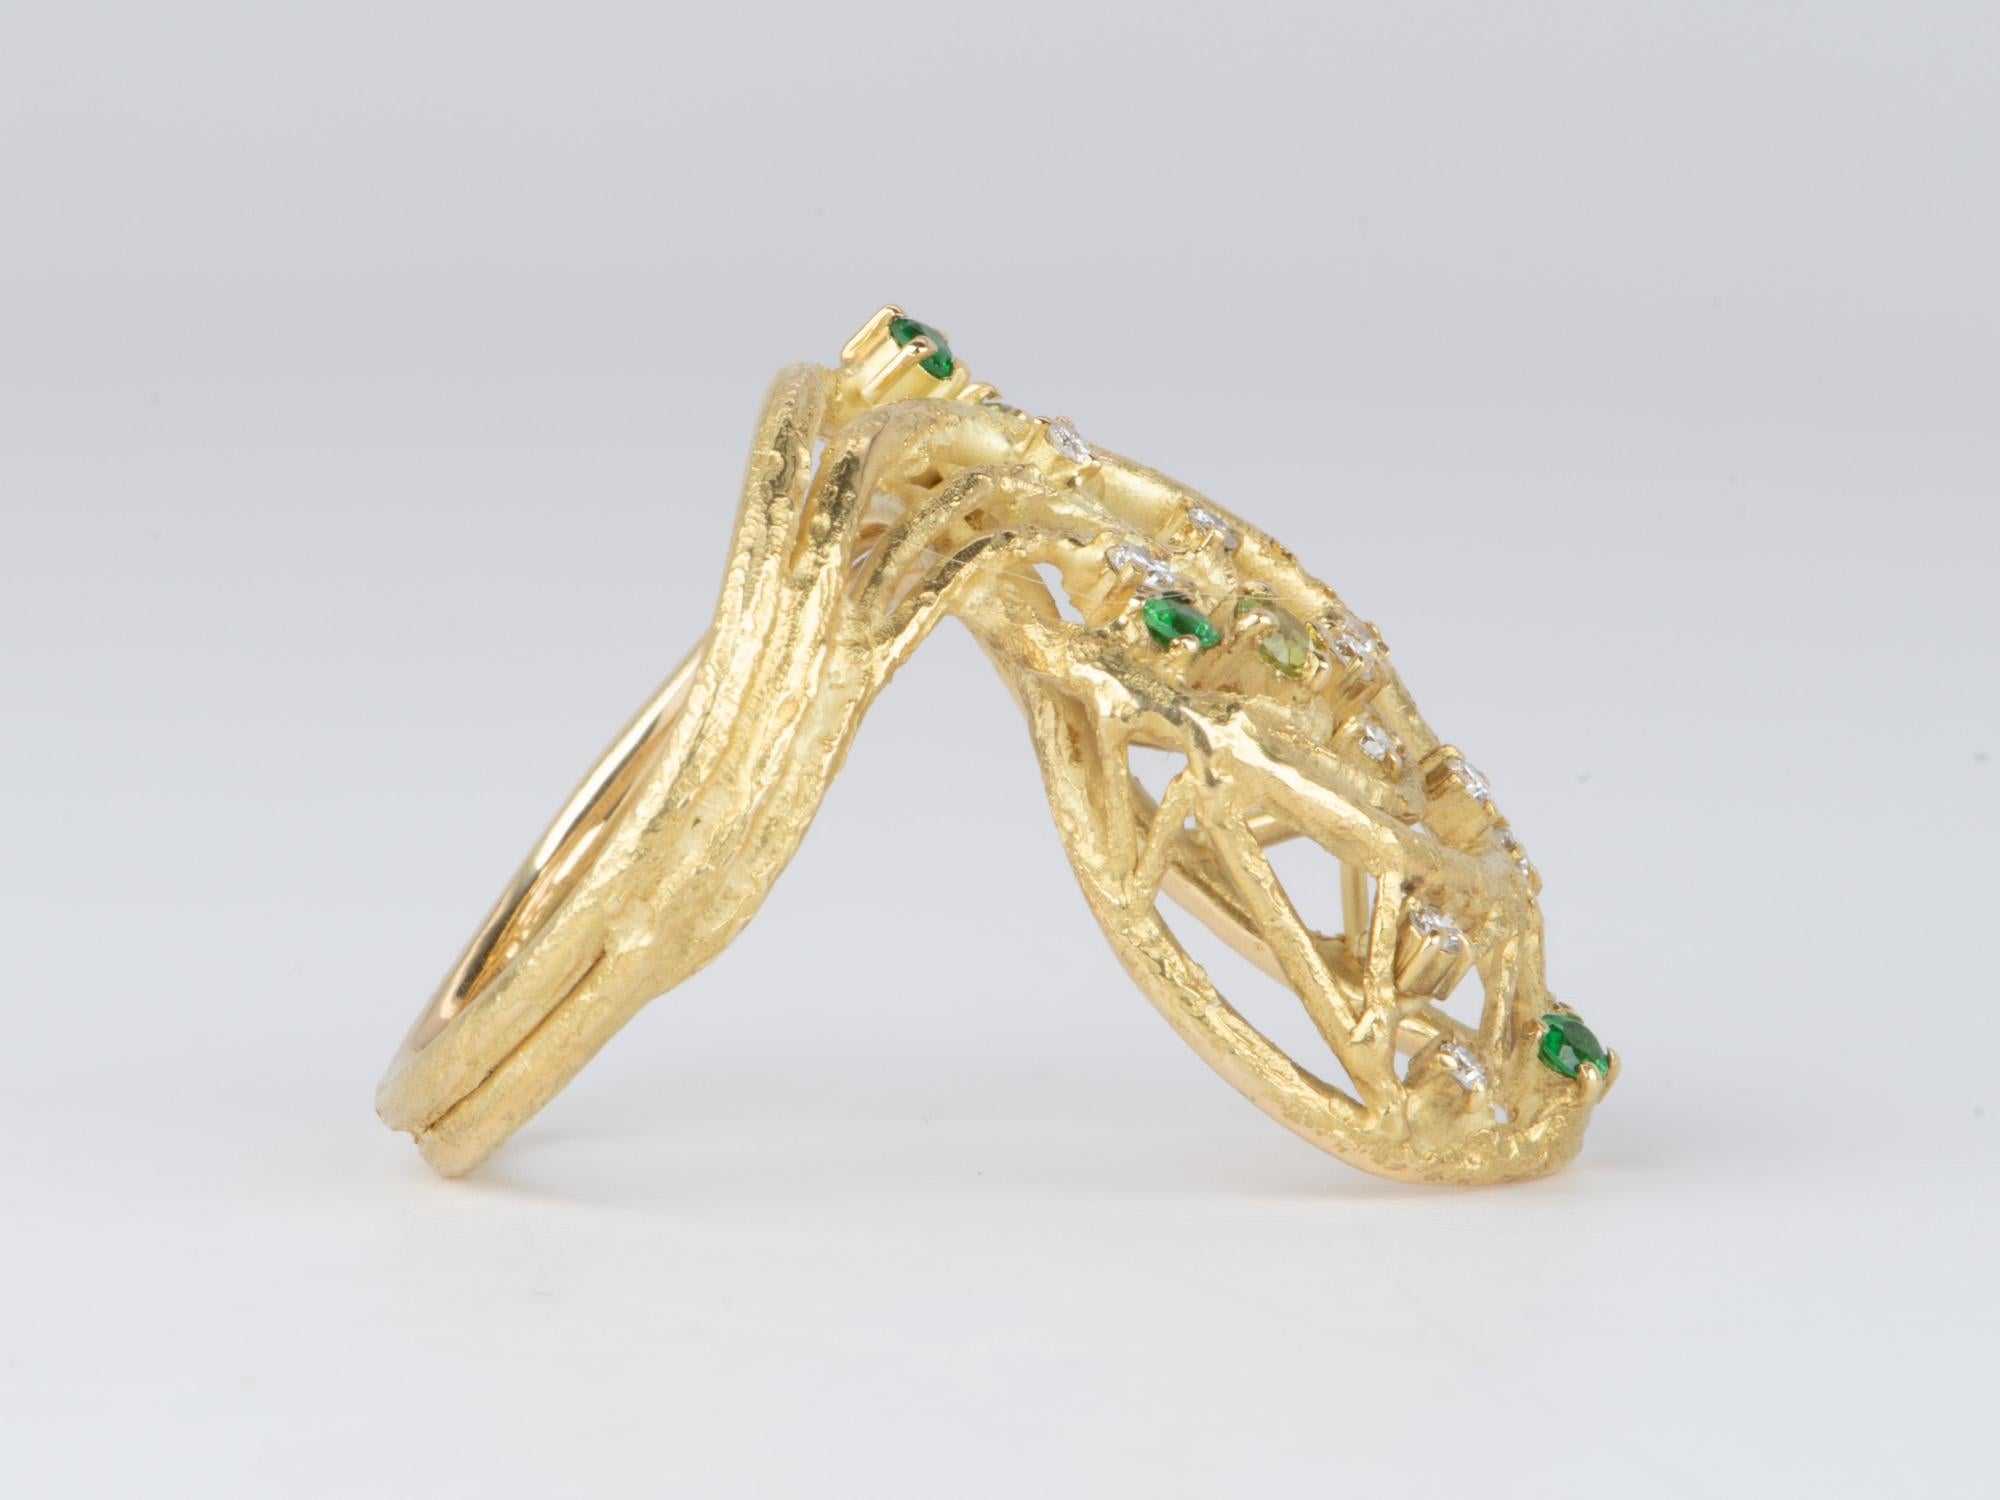 Uncut Elongated Modernist Ring with Diamond and Tsavorite 18K Gold 9g V1121 For Sale